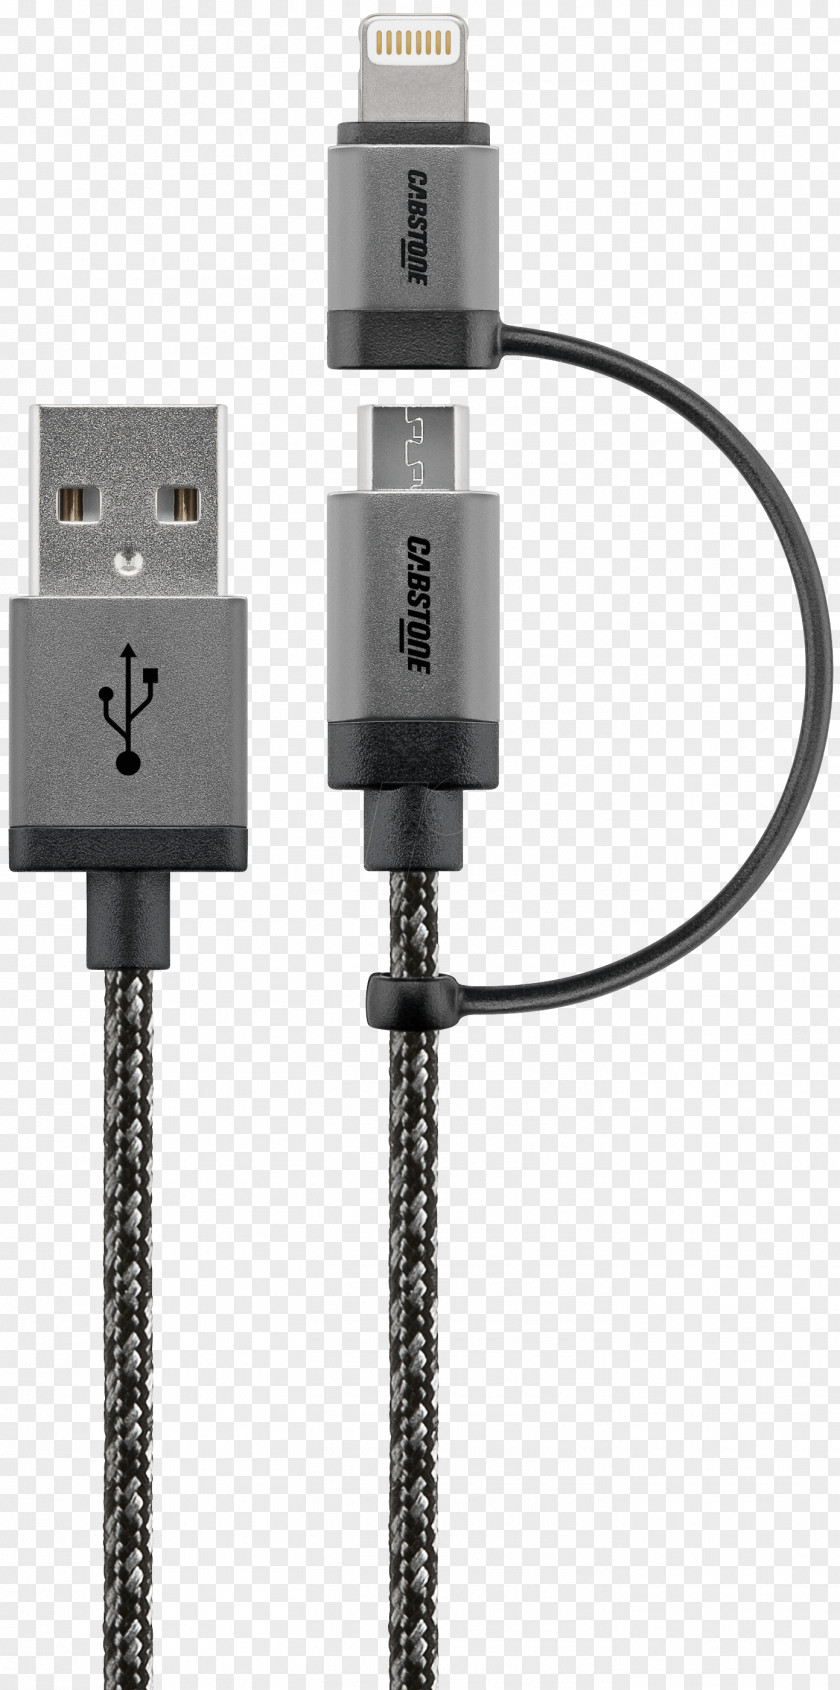 Micro Usb Cable Battery Charger IPad Mini Micro-USB Lightning PNG